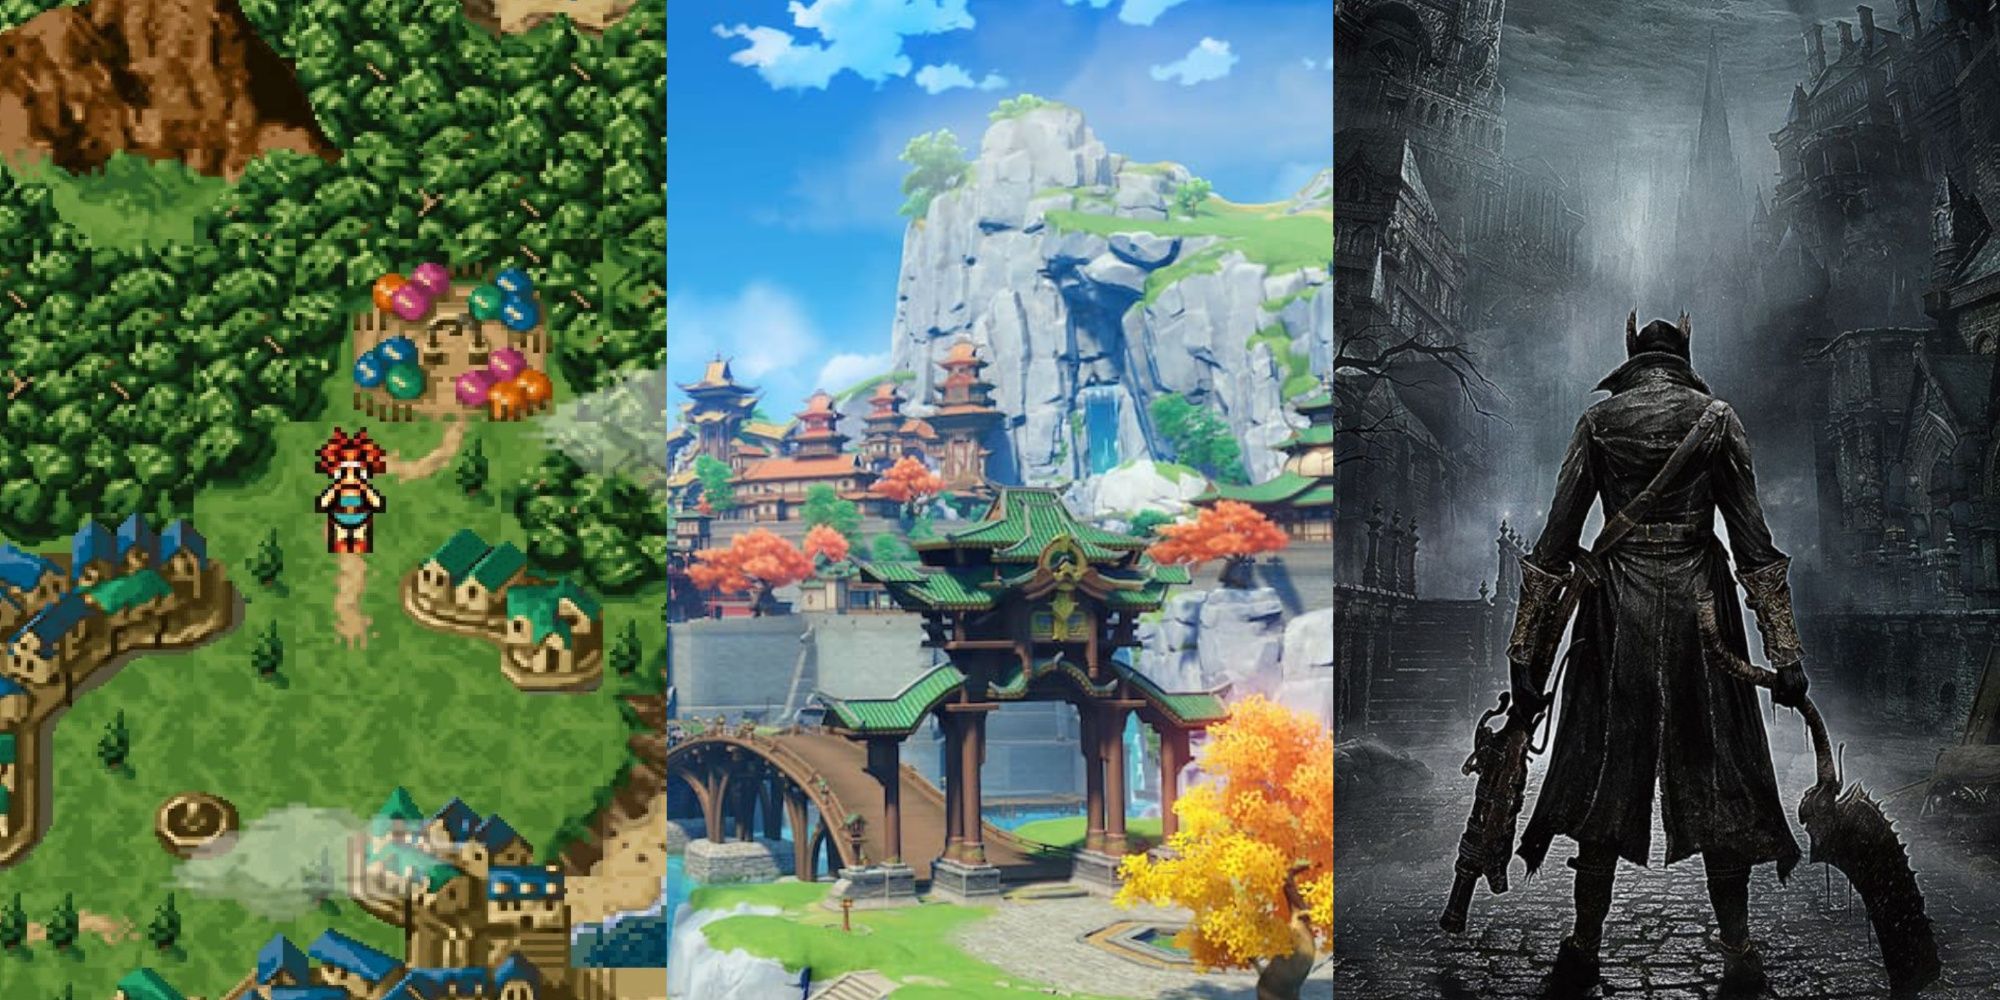 A collage showing the worlds of Chrono Trigger, Genshin Impact, and Bloodborne.